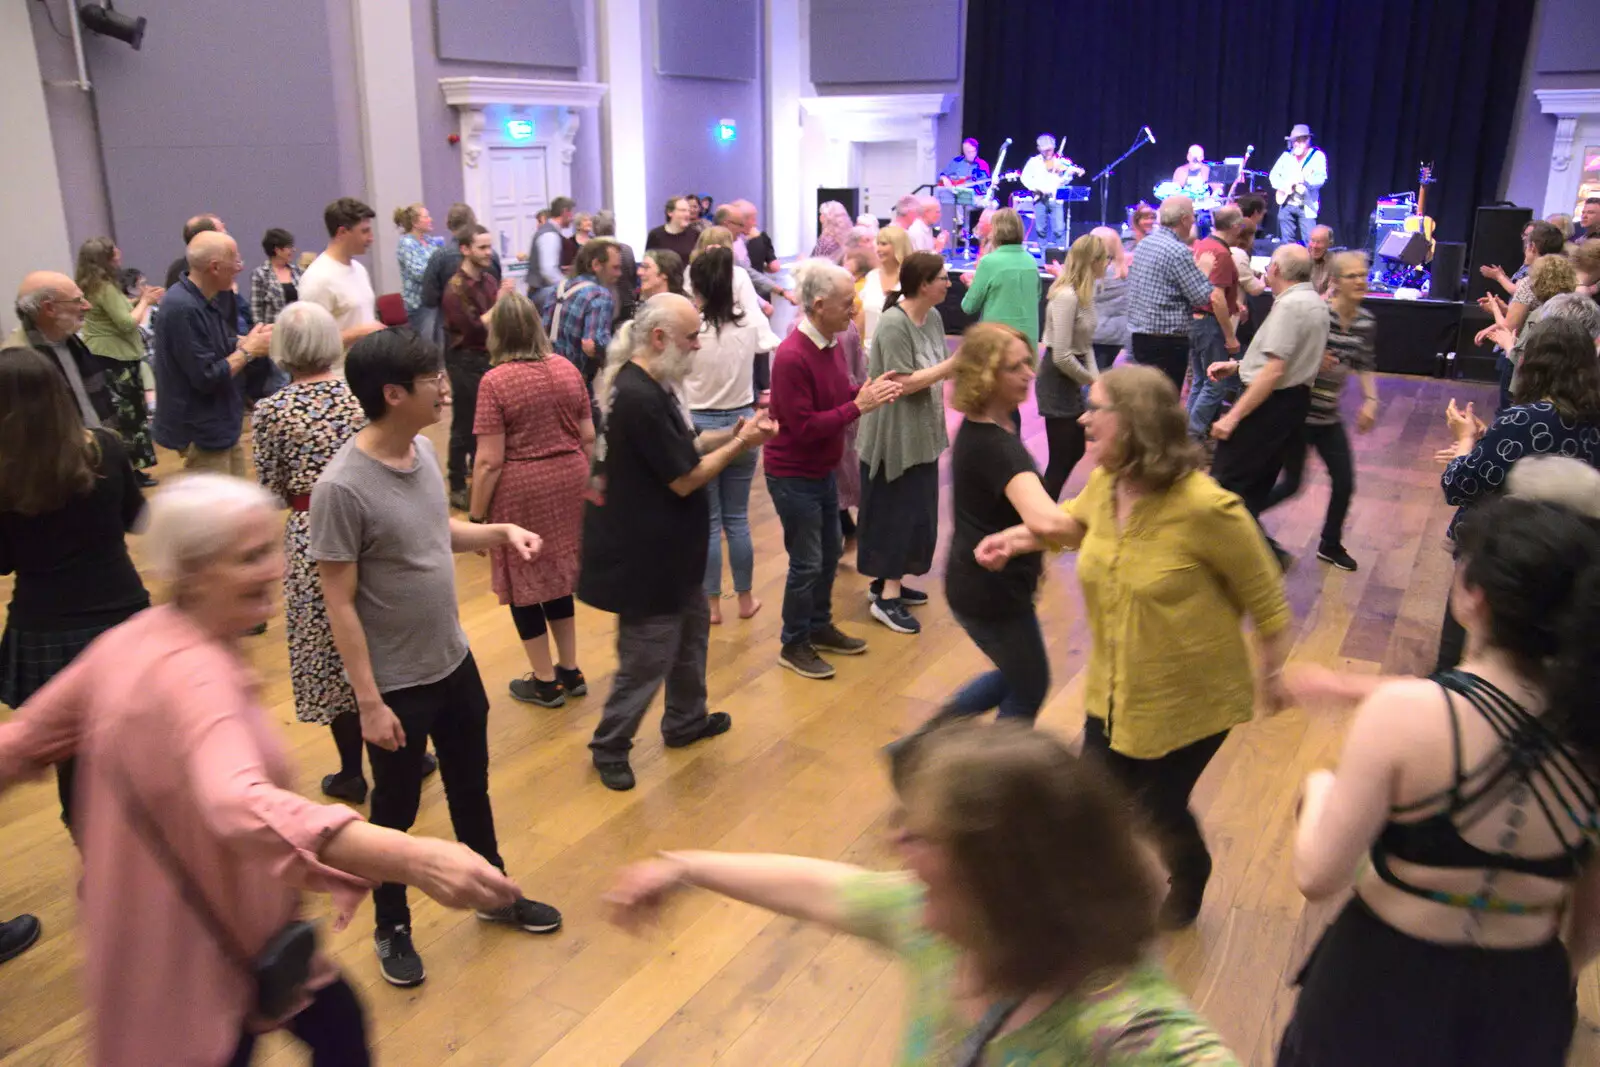 Some kind of stip-the-willow occurs, from DesignerMakers' Fund-Raising Ceilidh, The Cornhall, Diss - 13th May 2023